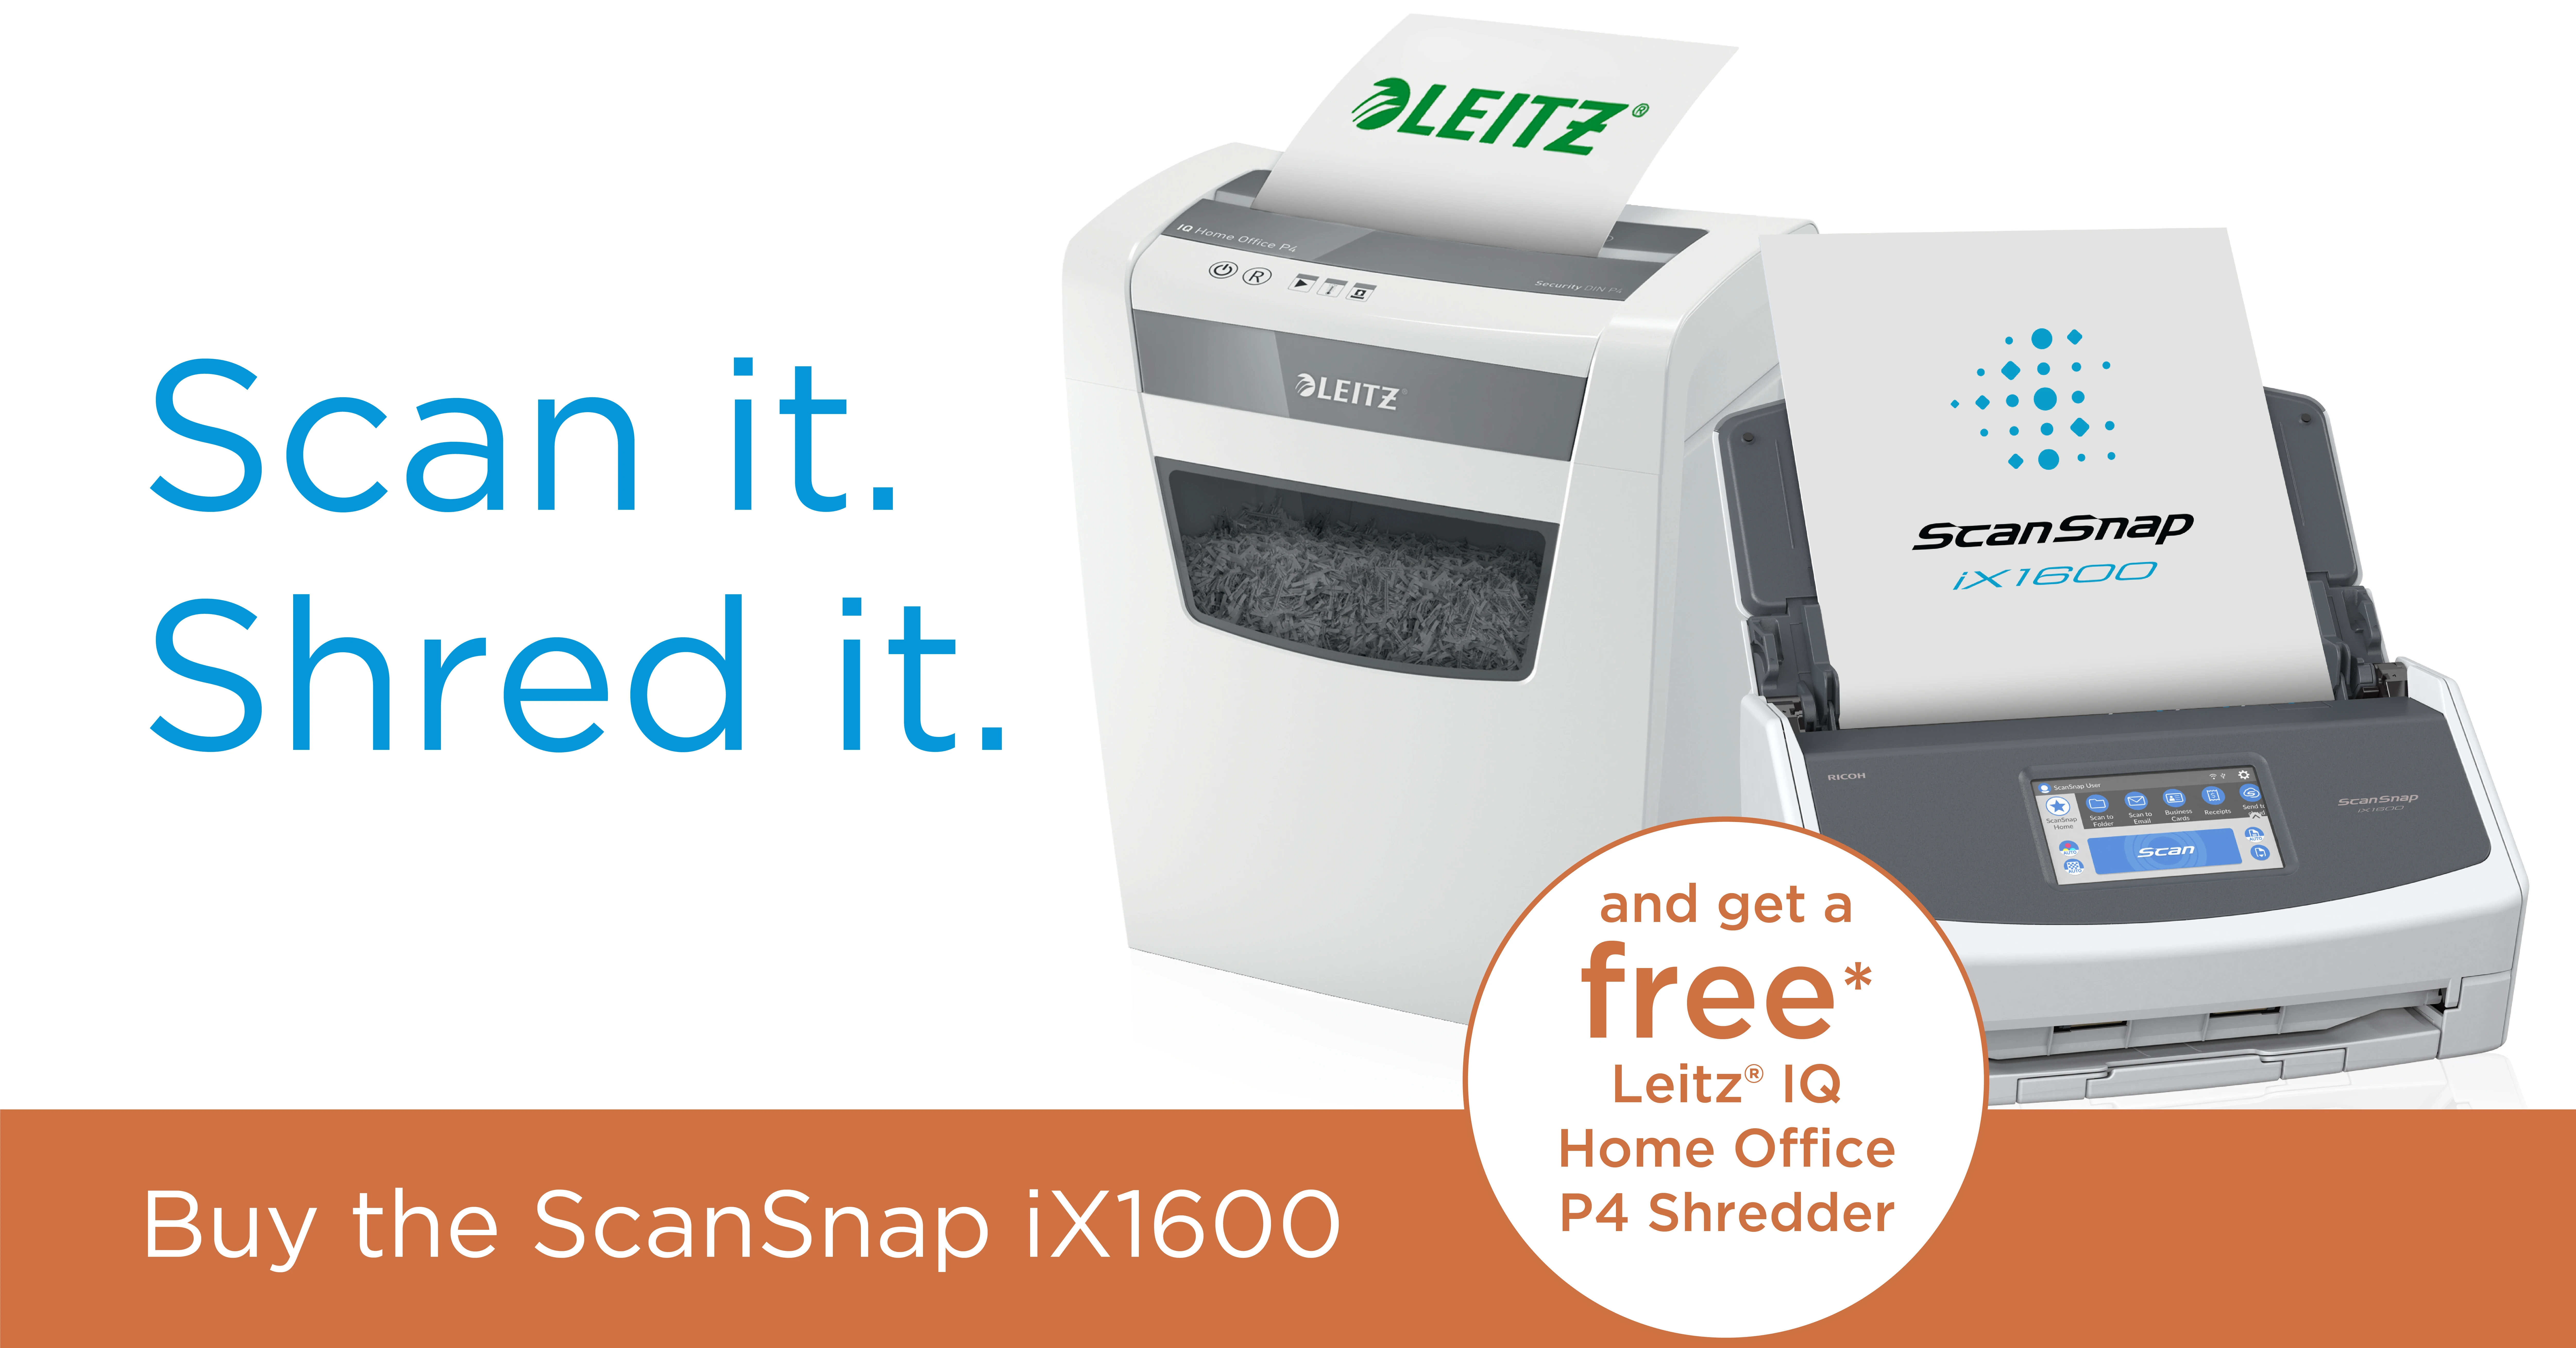 ScanSnap free shredder promotion with an iX1600 scanner